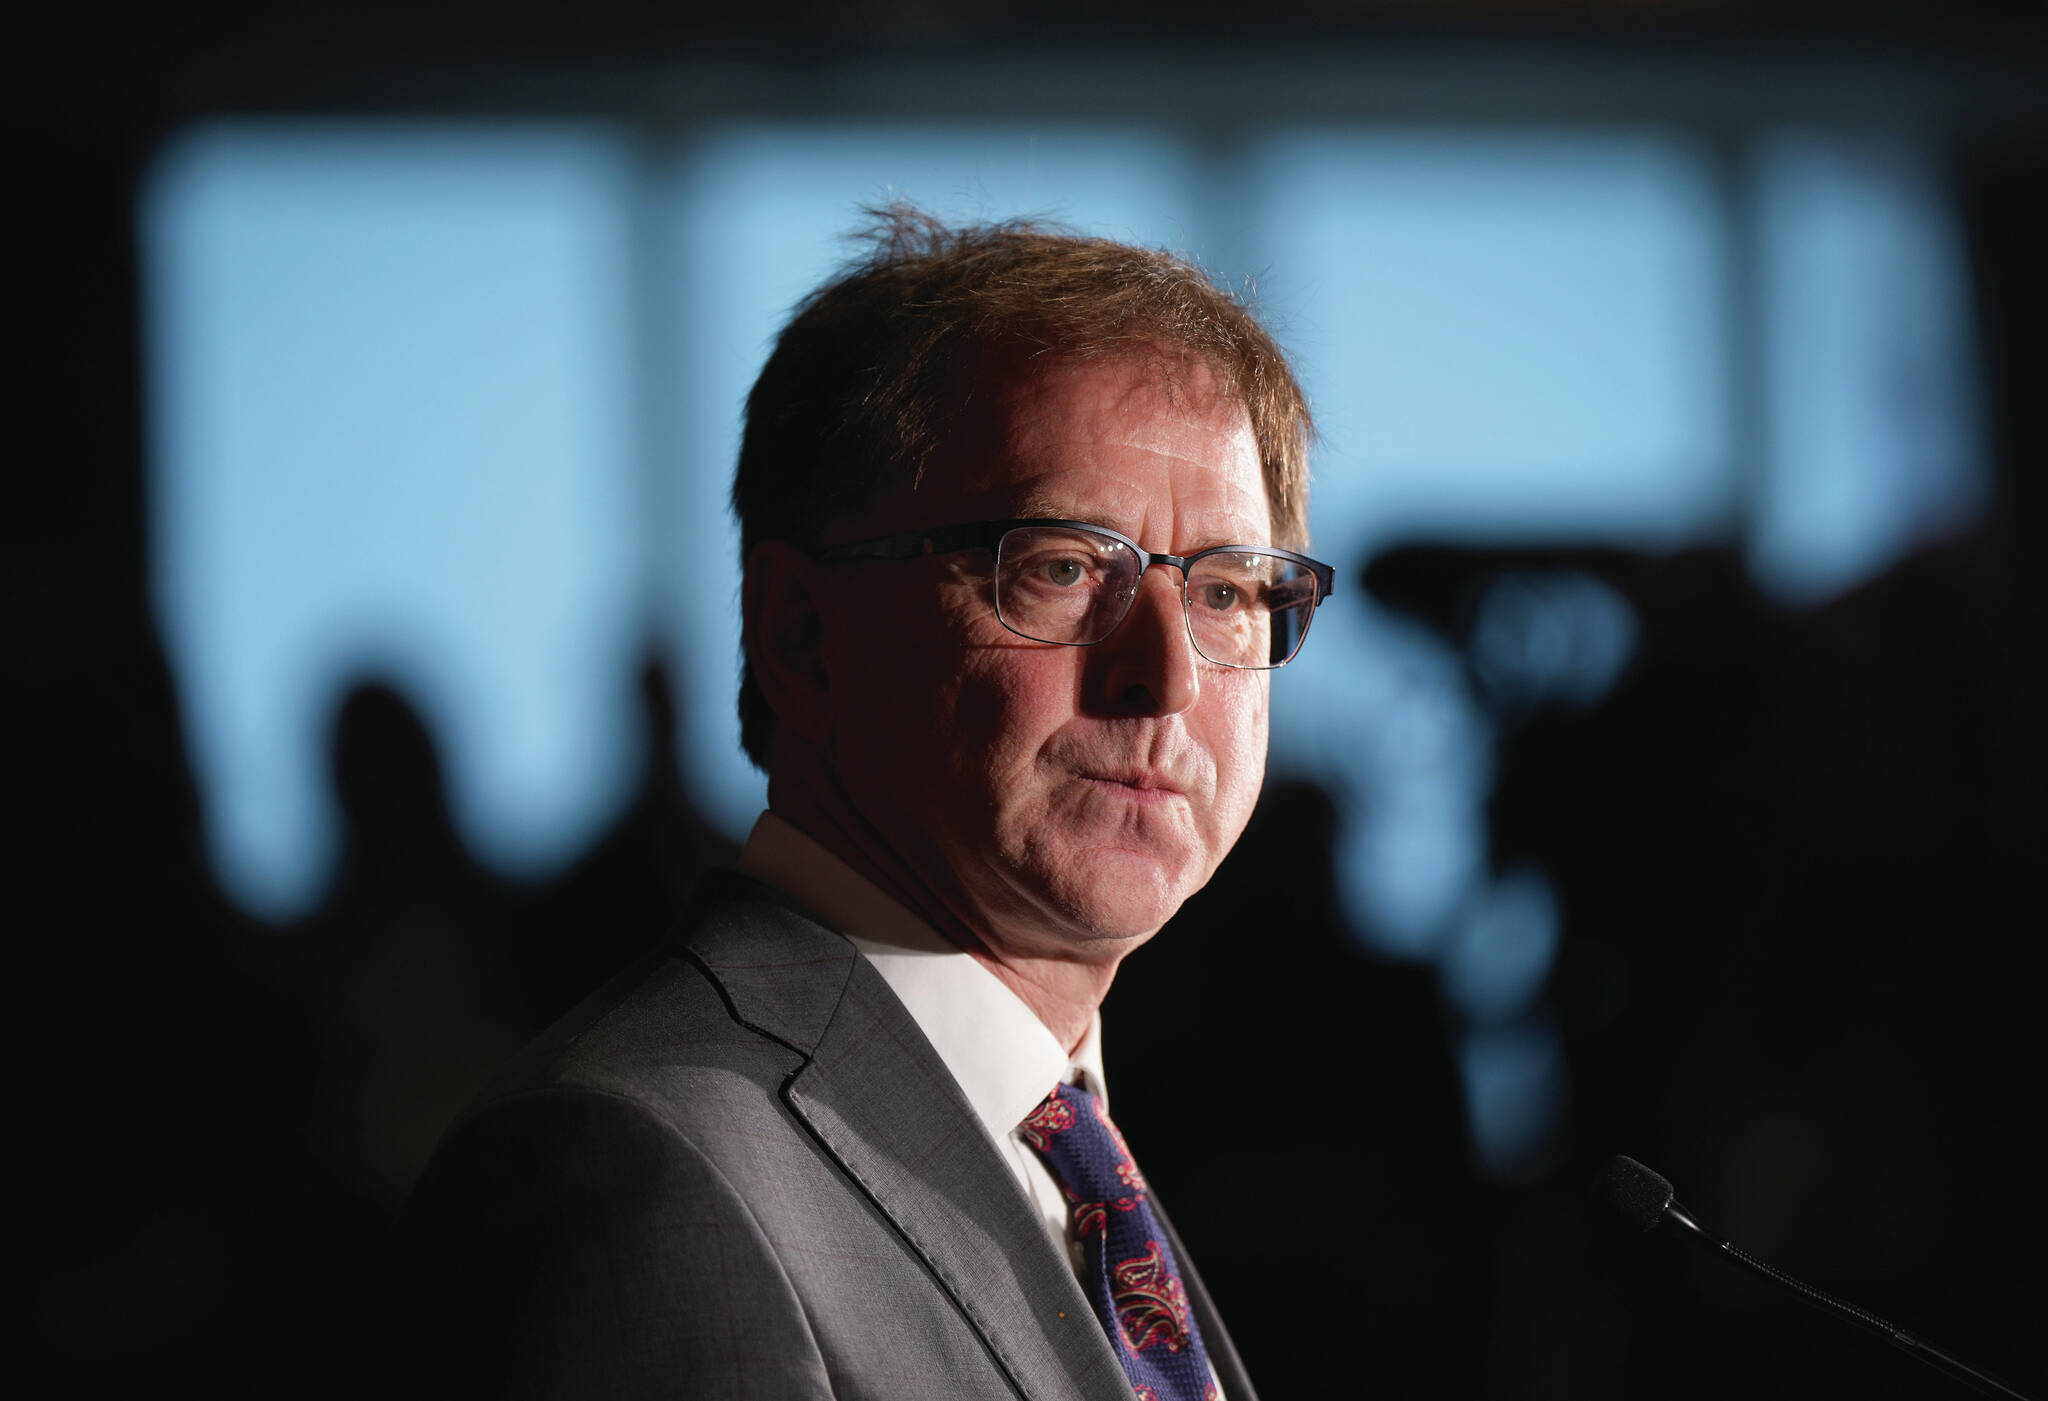 Adrian Dix, B.C. minister of health, said the settlement between the Medical Services Commission and Telus Health over its LifePlus is evidence of his government’s commitment to protect public health care. (THE CANADIAN PRESS/Darryl Dyck)